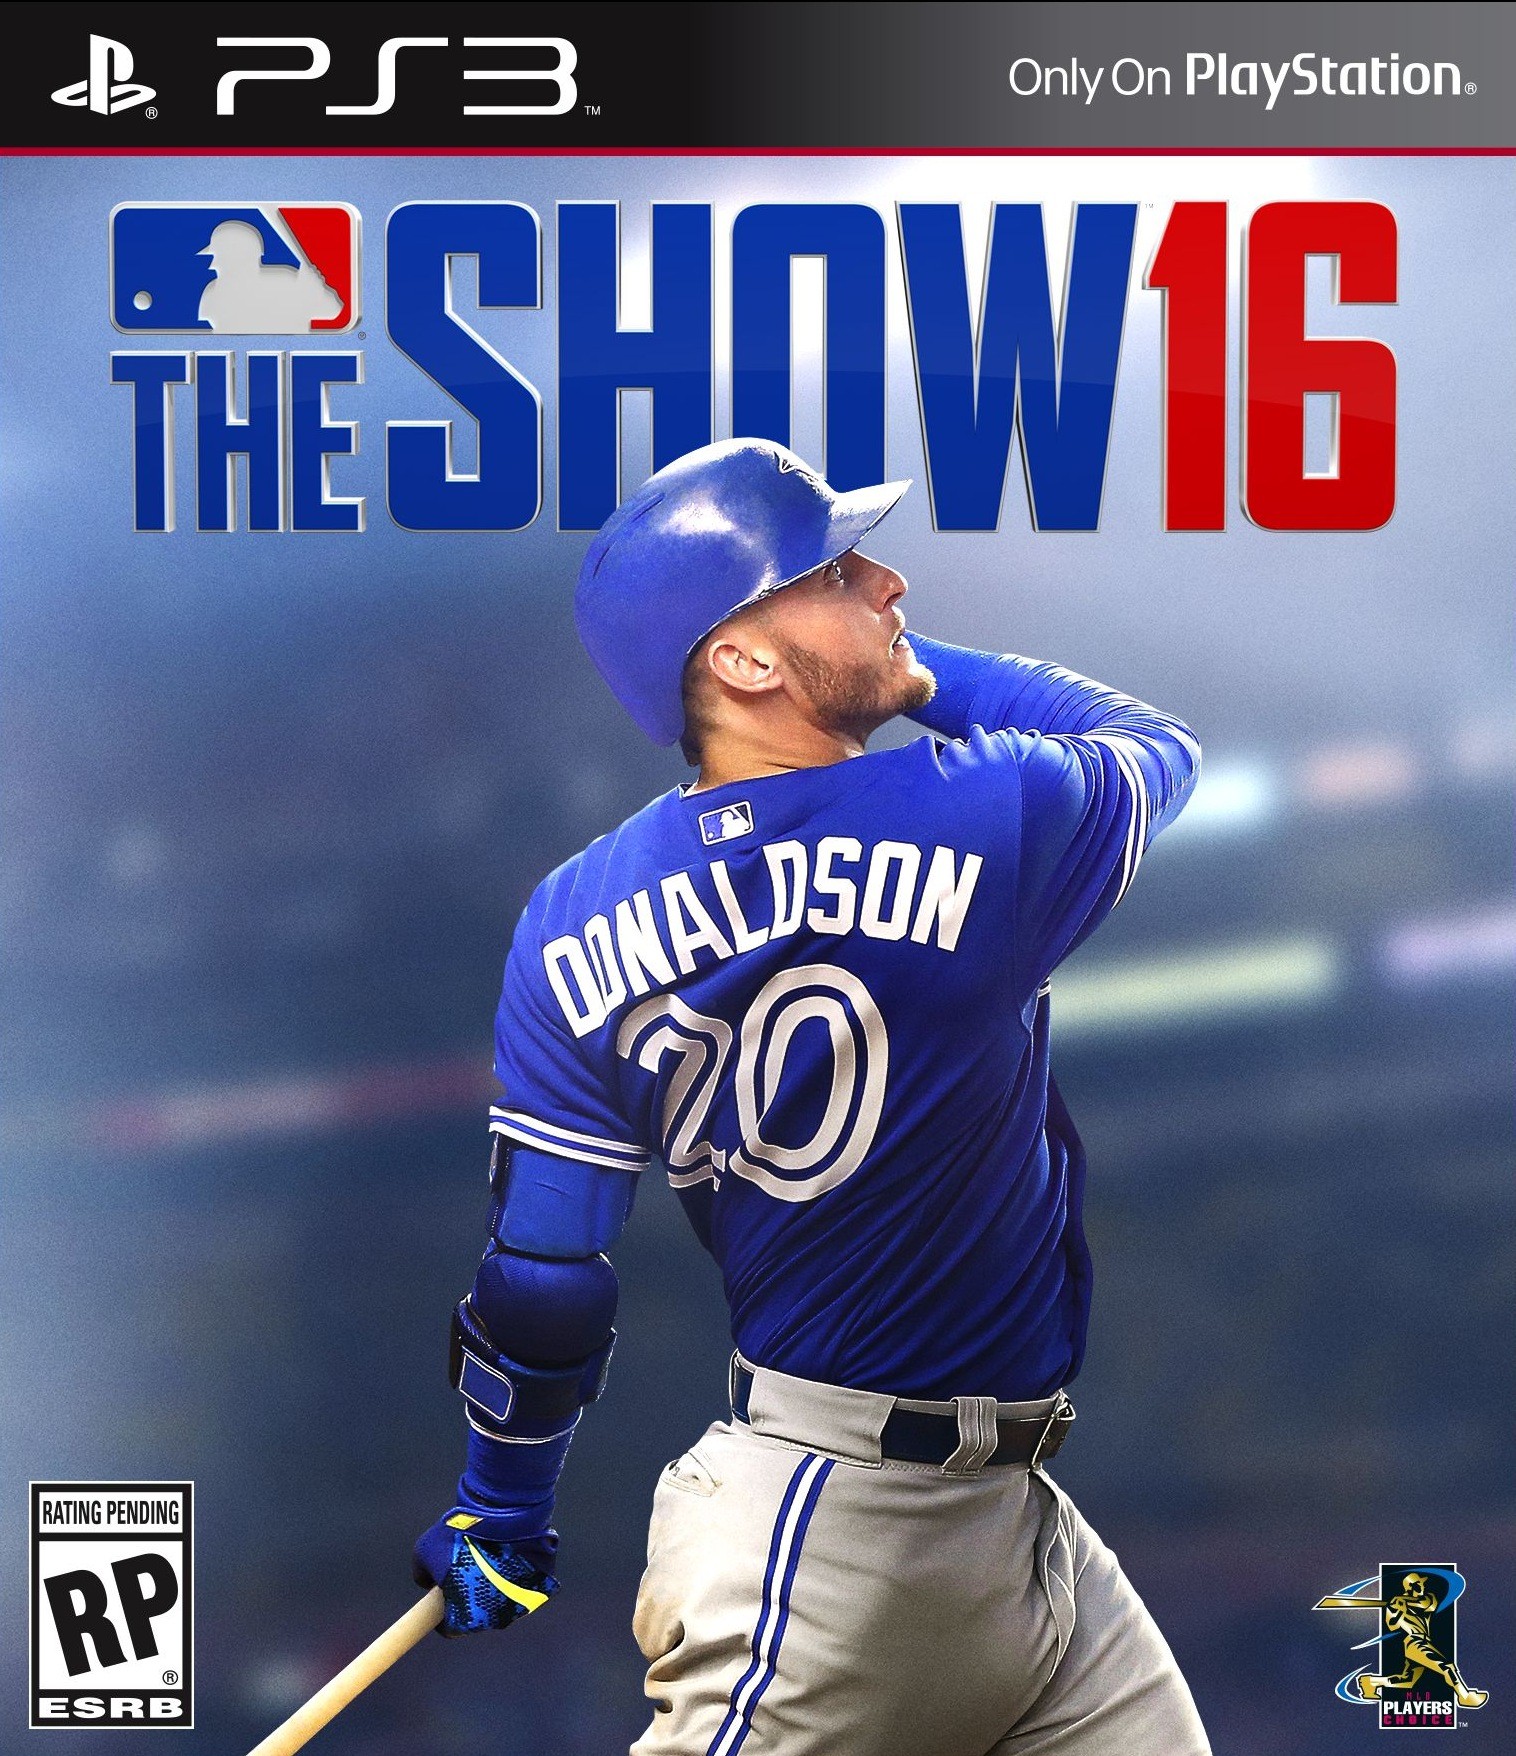 MLB The Show 16